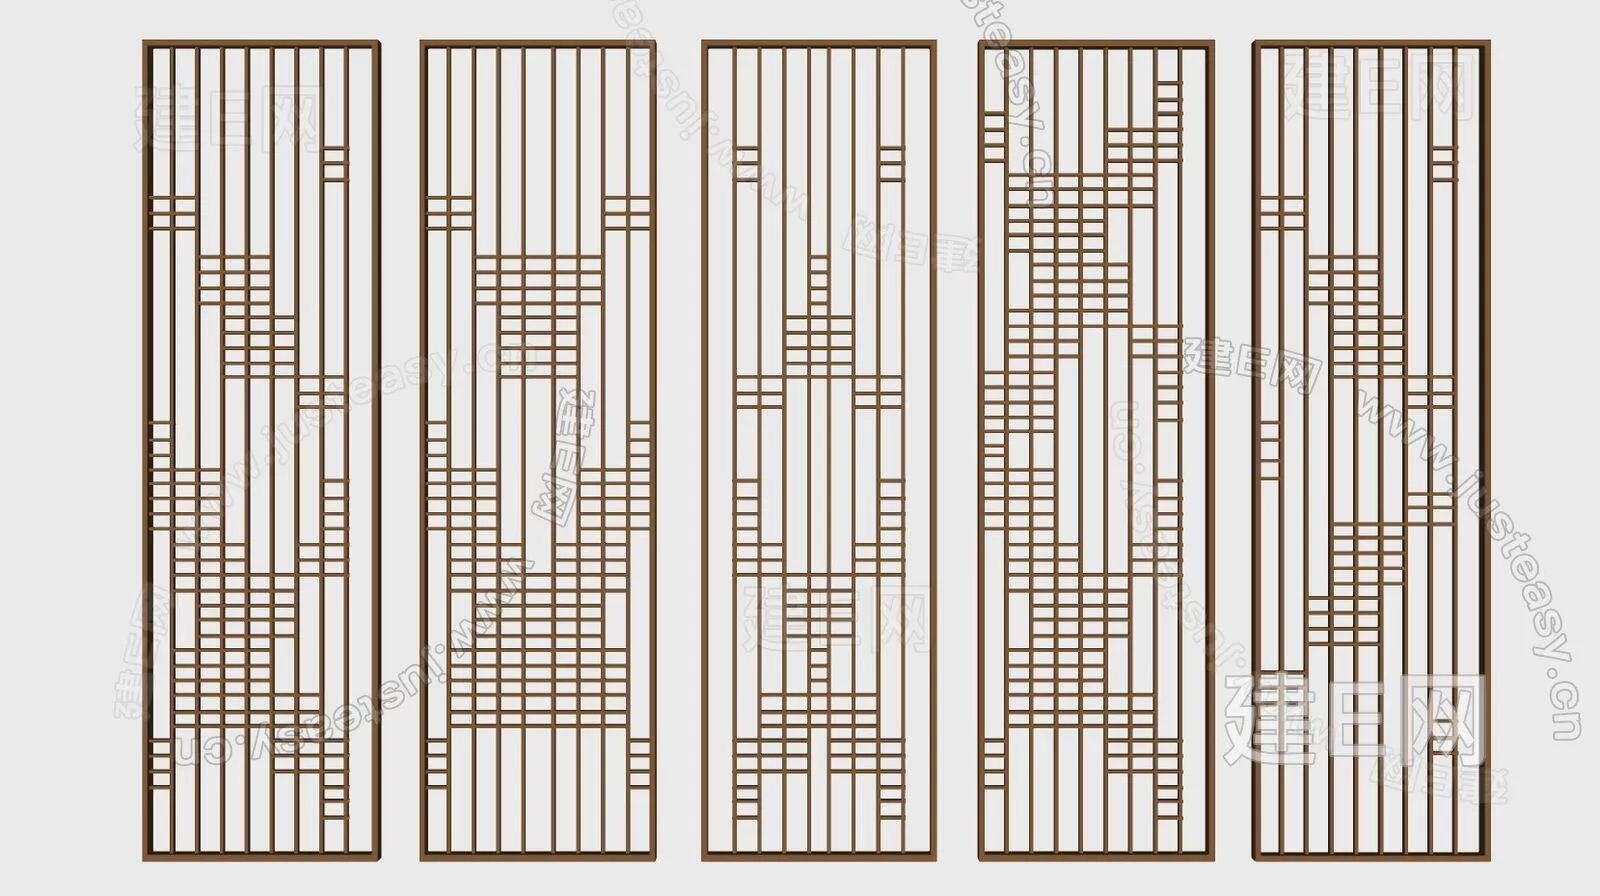 CHINESE PARTITION SCREEN - SKETCHUP 3D MODEL - ENSCAPE - 111493436